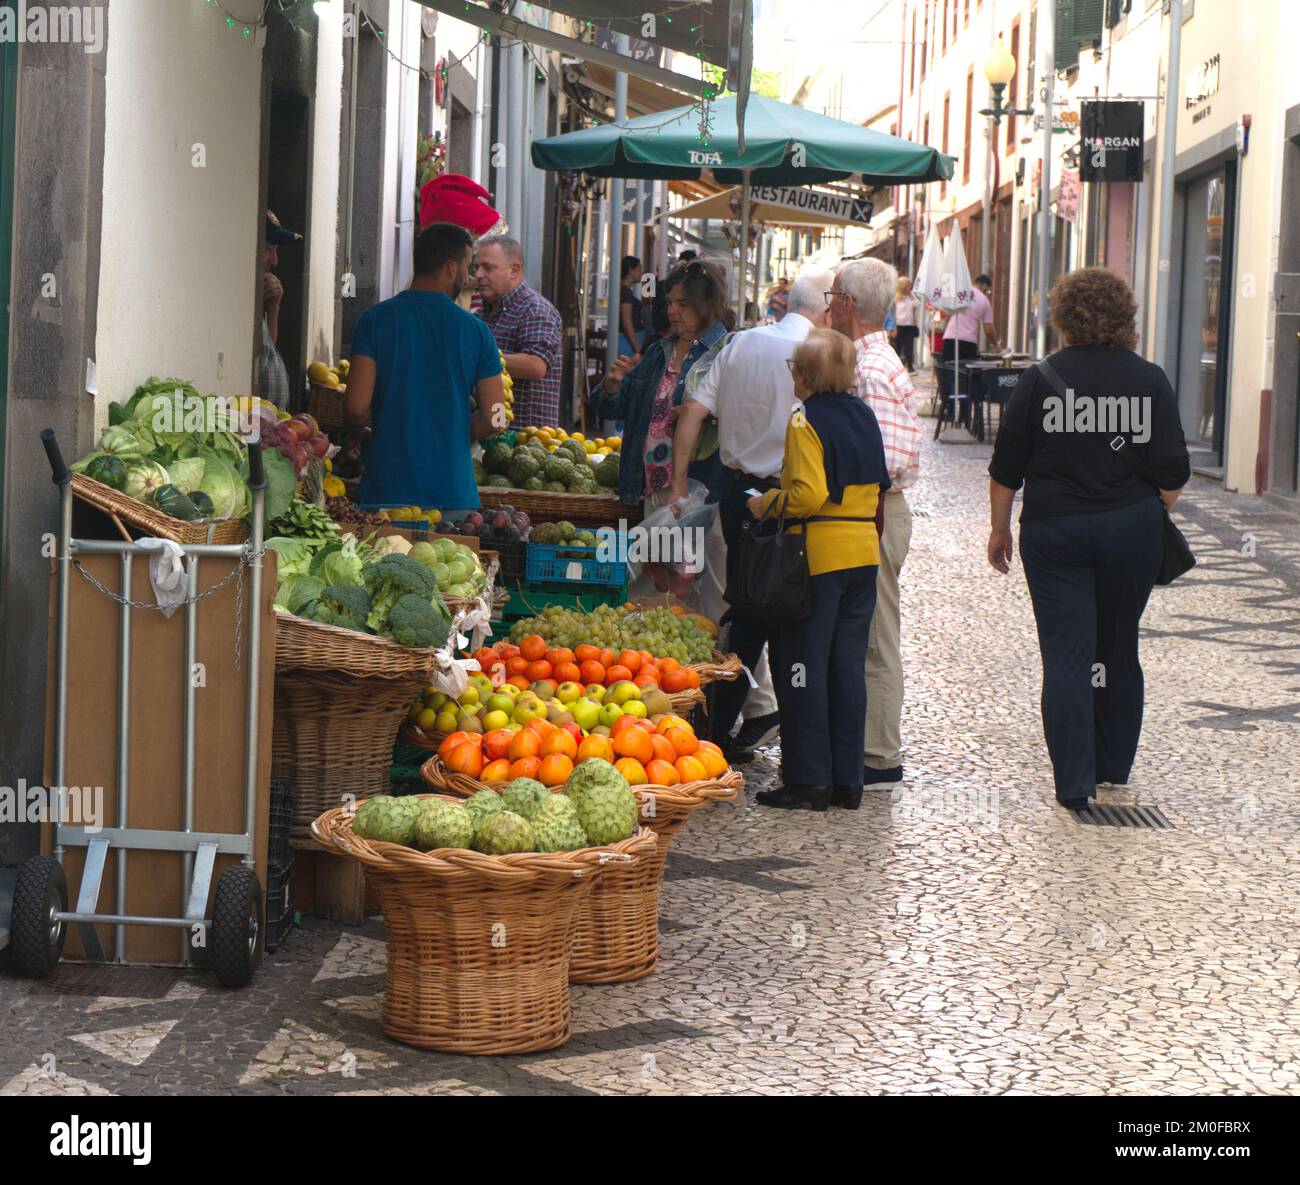 A Busy Fruit and Vegetable Shop in Funchal, Madeira, Portugal. Stock Photo